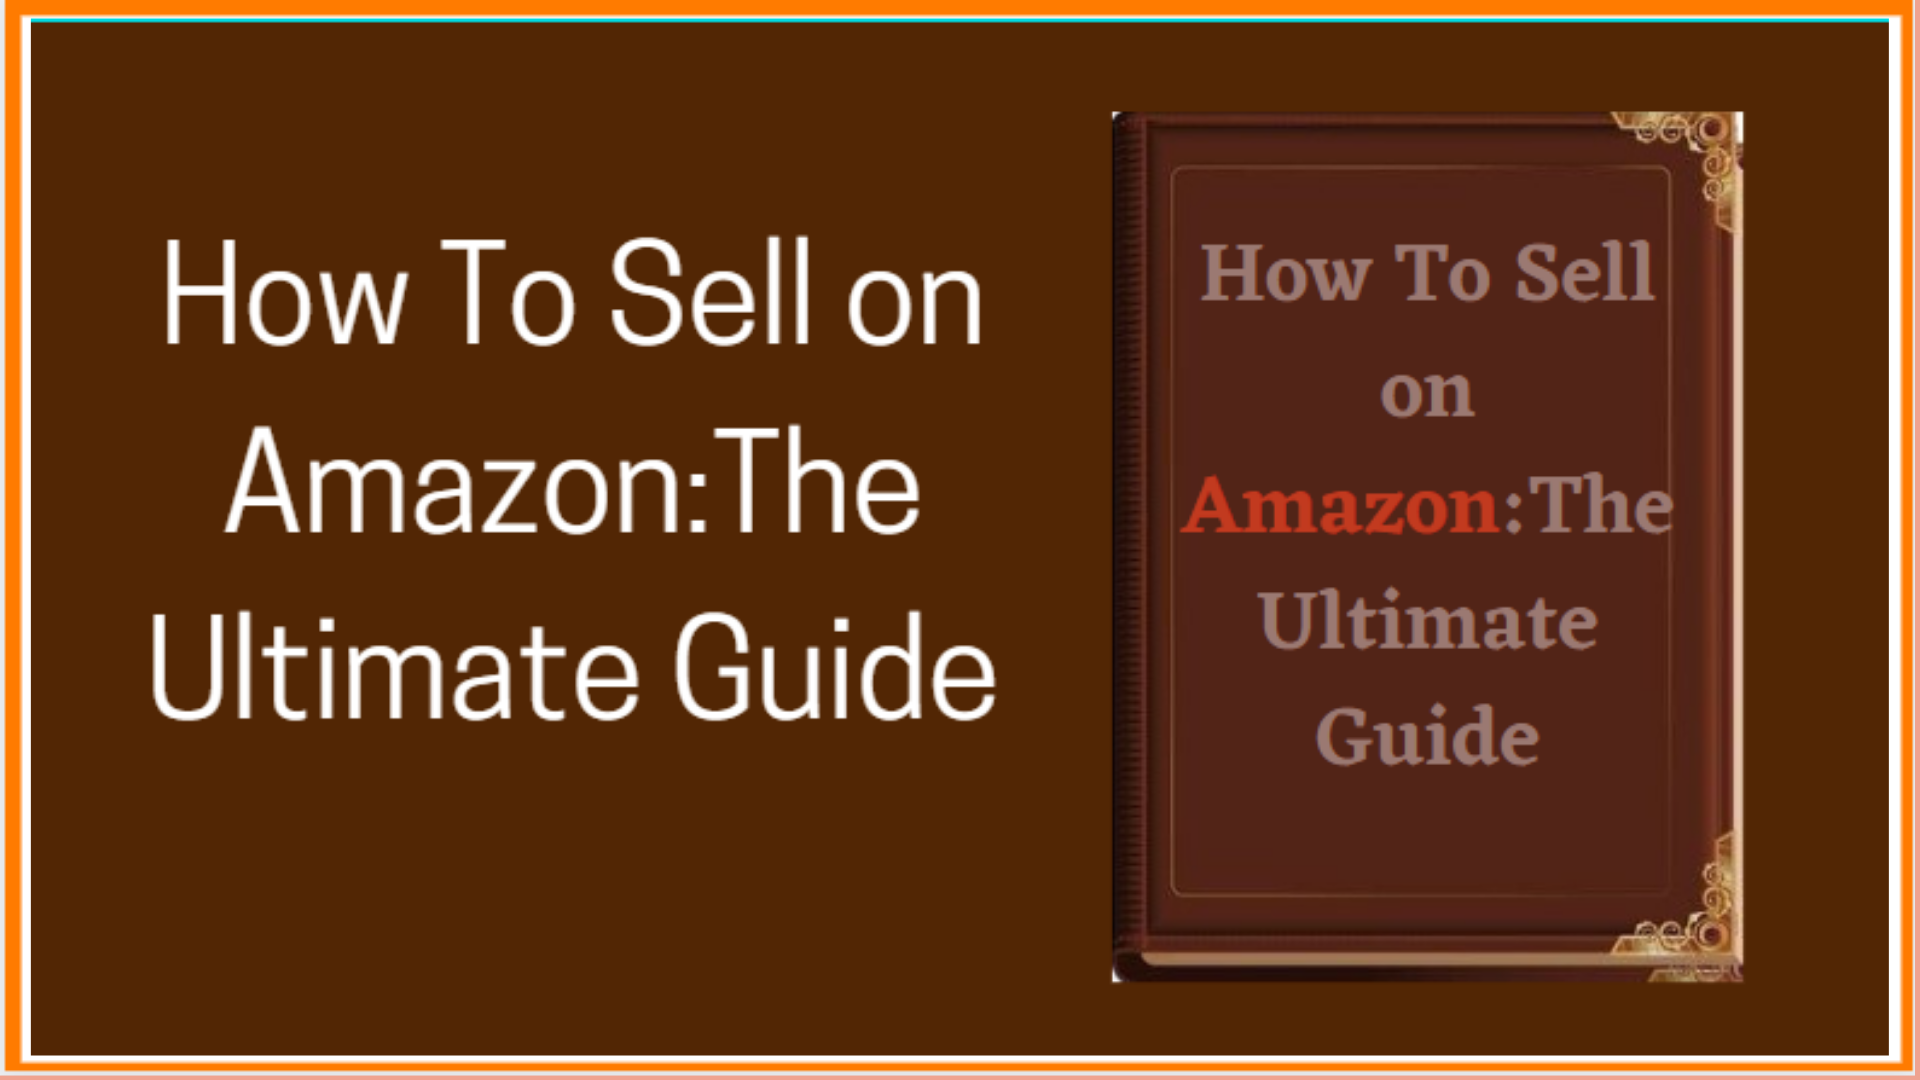 How To Sell on Amazon:The Ultimate Guide